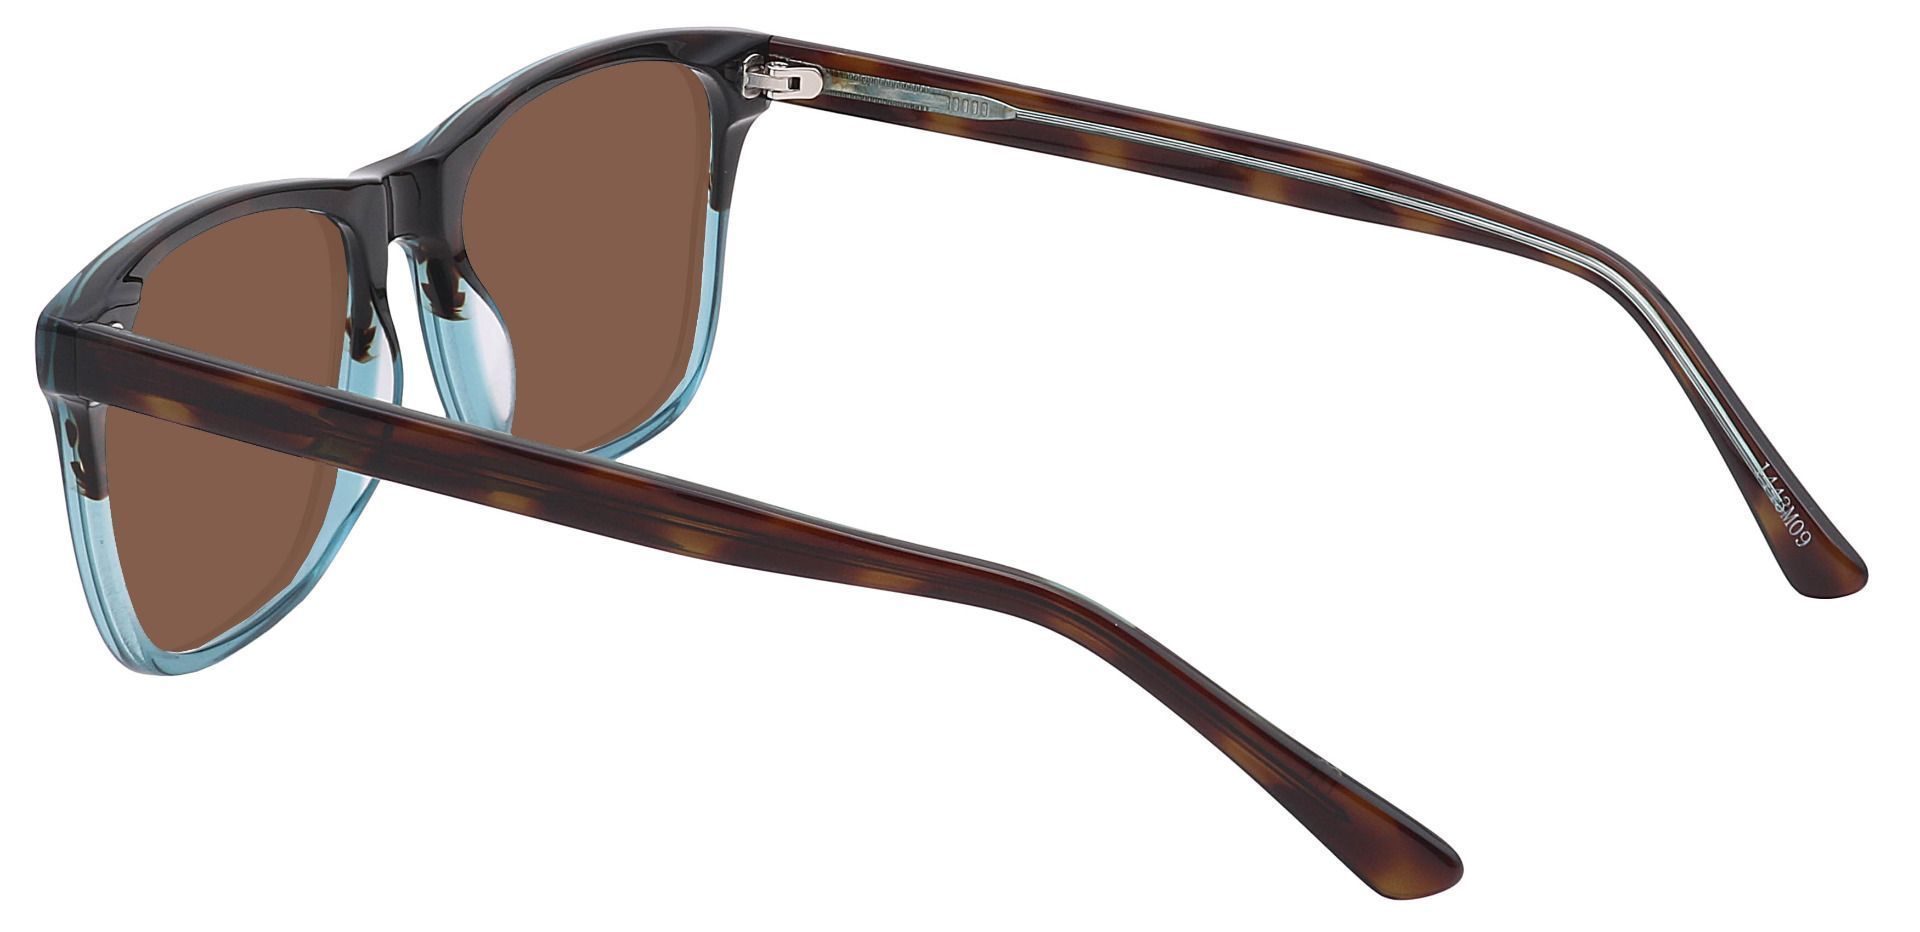 Cantina Square Lined Bifocal Sunglasses - Multi Color Frame With Brown Lenses